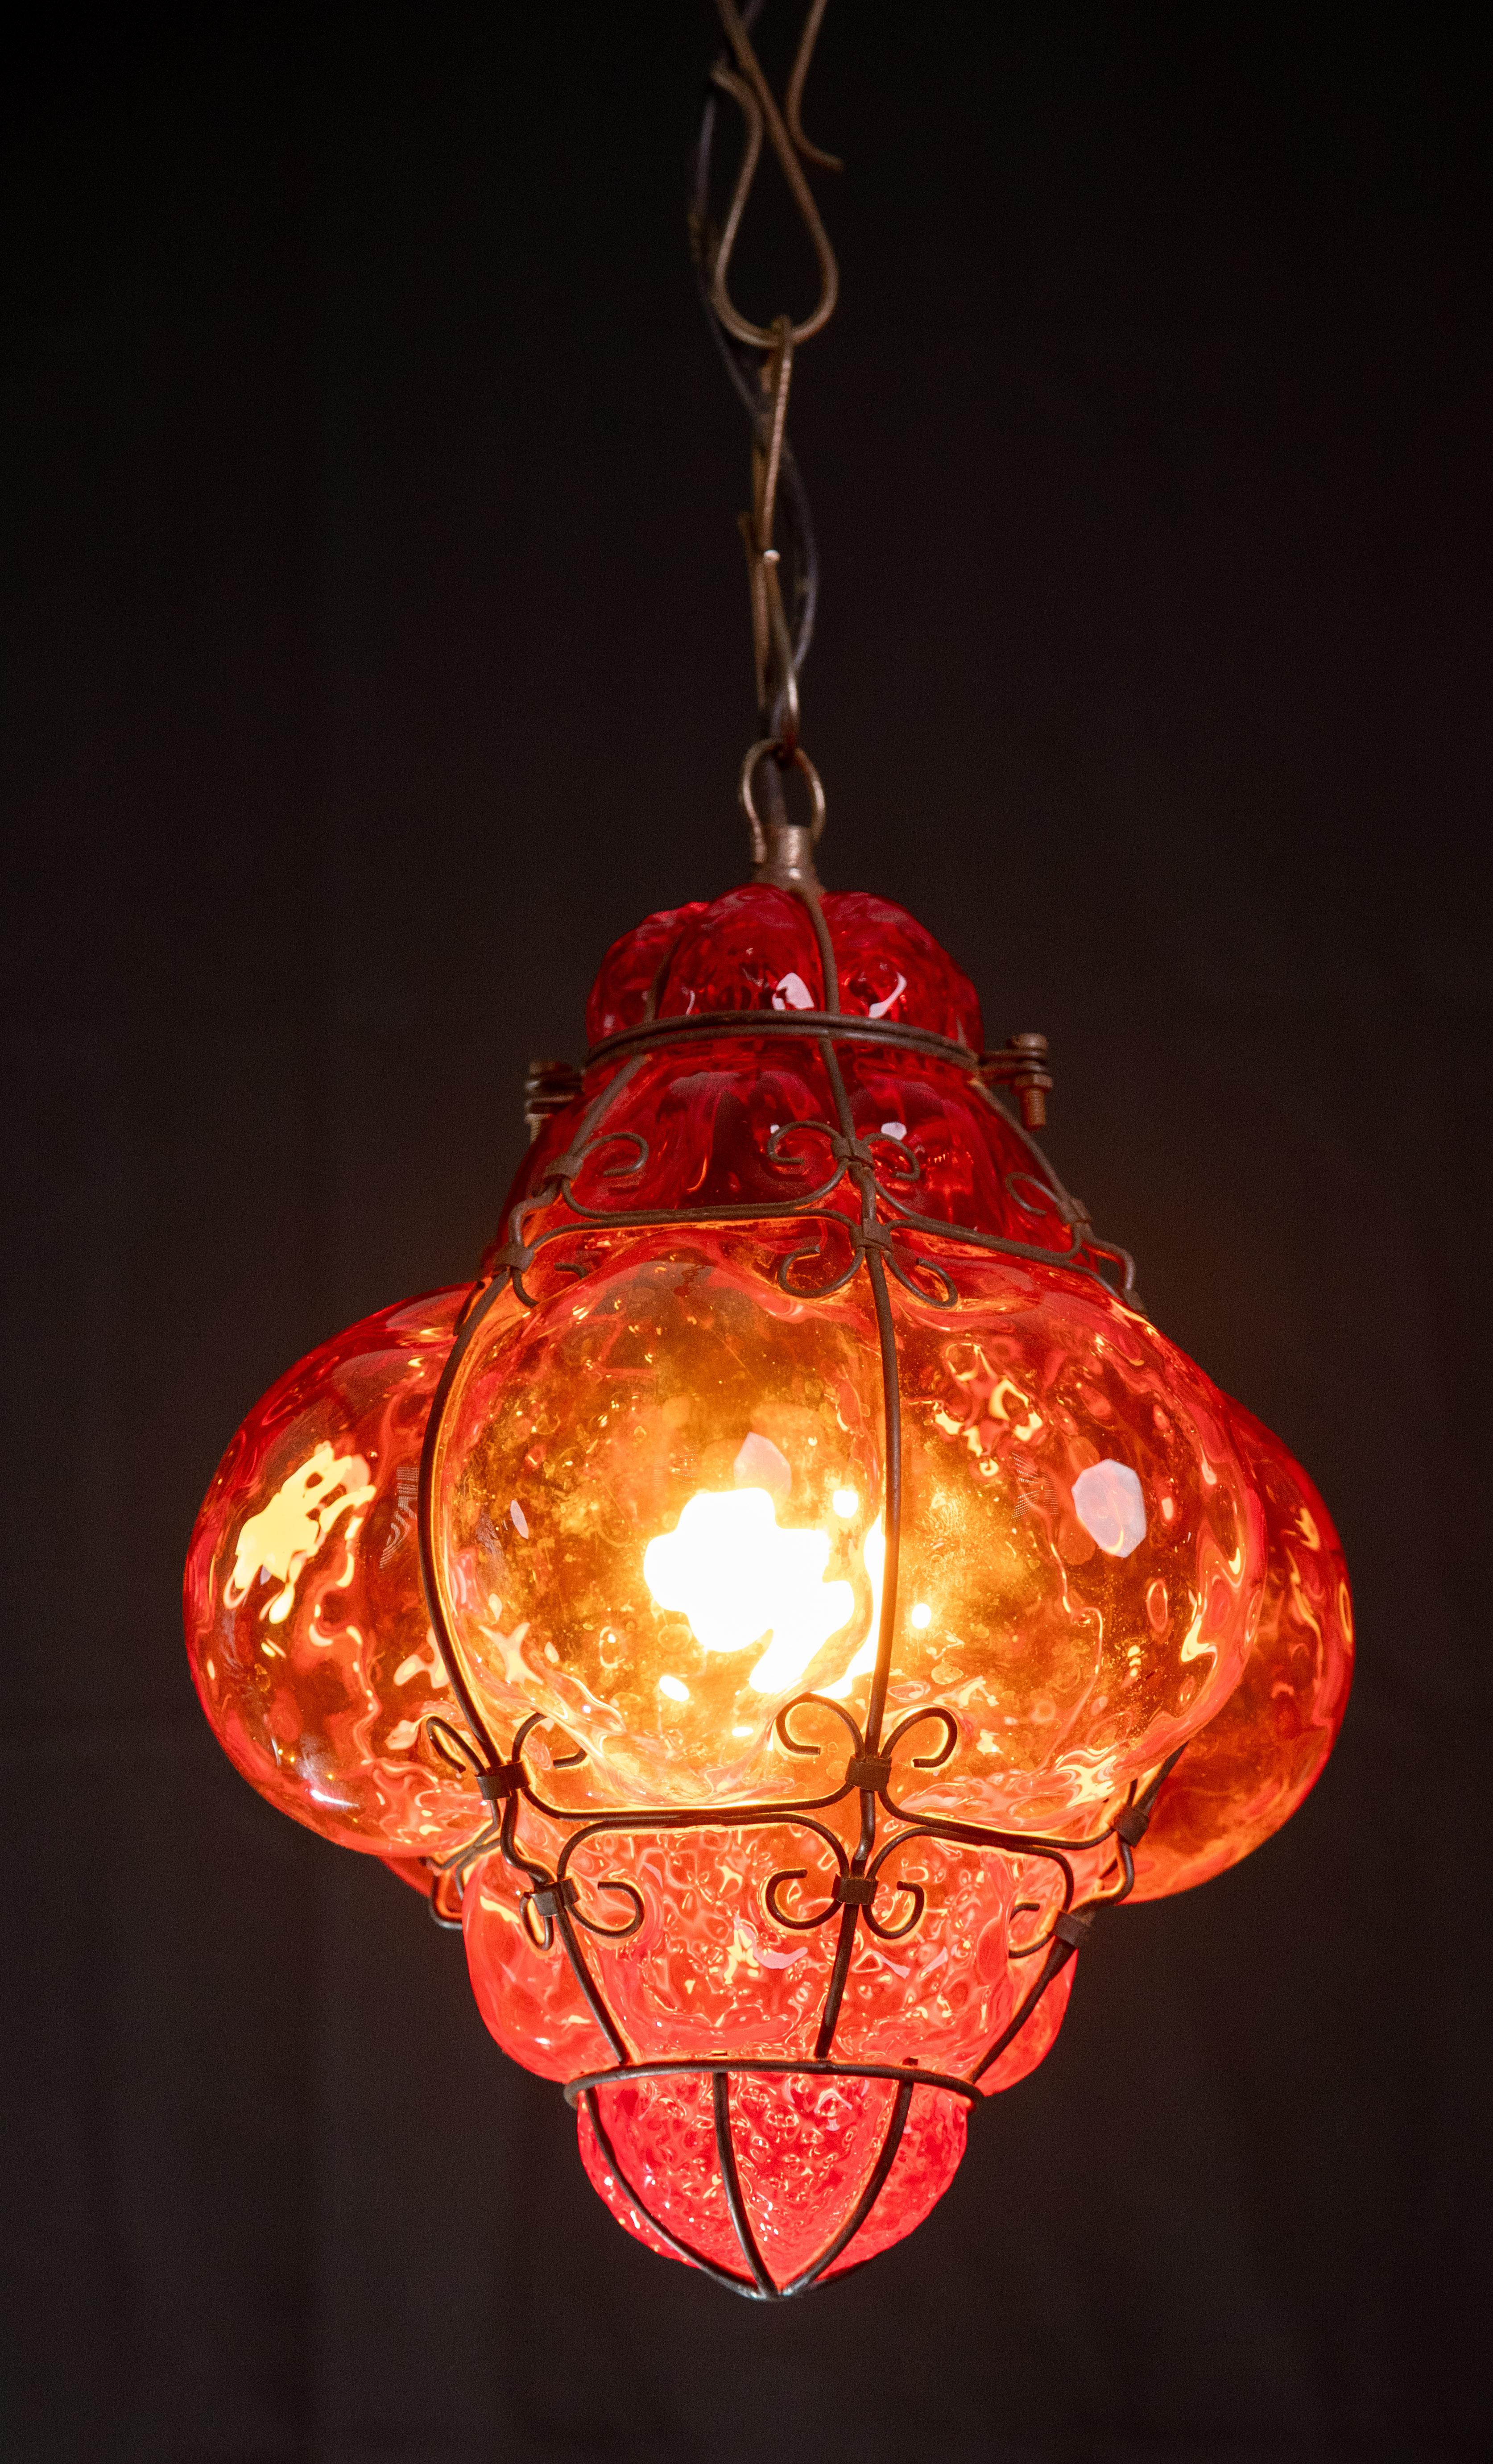 A beautiful light for hallways, entryways and living rooms, this hand-blown glass lantern is attributed to Seguso. The glass is a bright red. As always, these beautiful lanterns create their own magic and show incredible craftsmanship.

The lantern